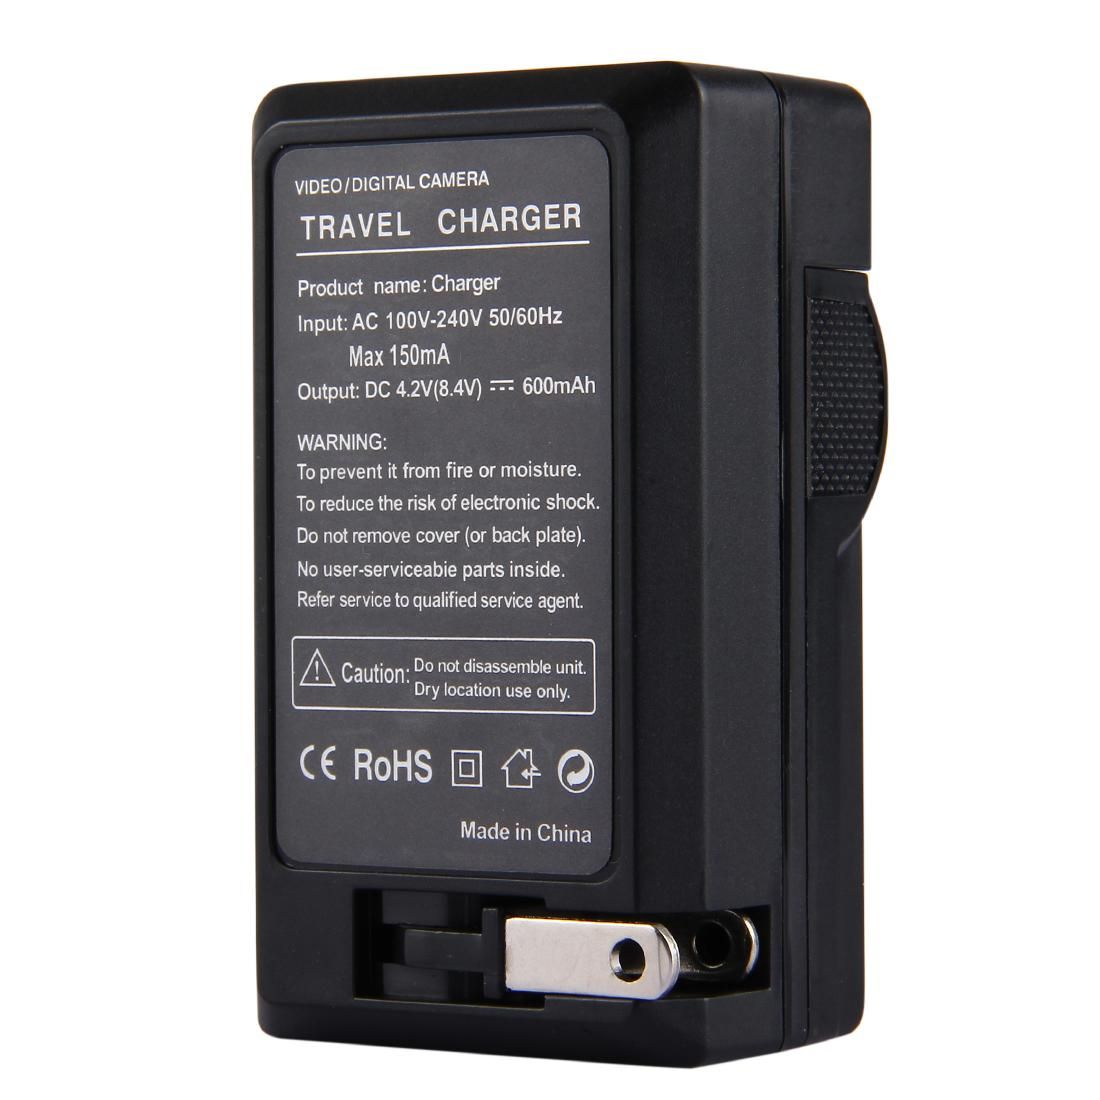 PULUZ US Plug Battery Charger for Sony NP-FH50 / NP-FH70 / NP-FH100 / NP-FP50 / NP-FP70 / NP-FP90 / NP-FV50 / NP-FV70 / NP-FV90 Battery